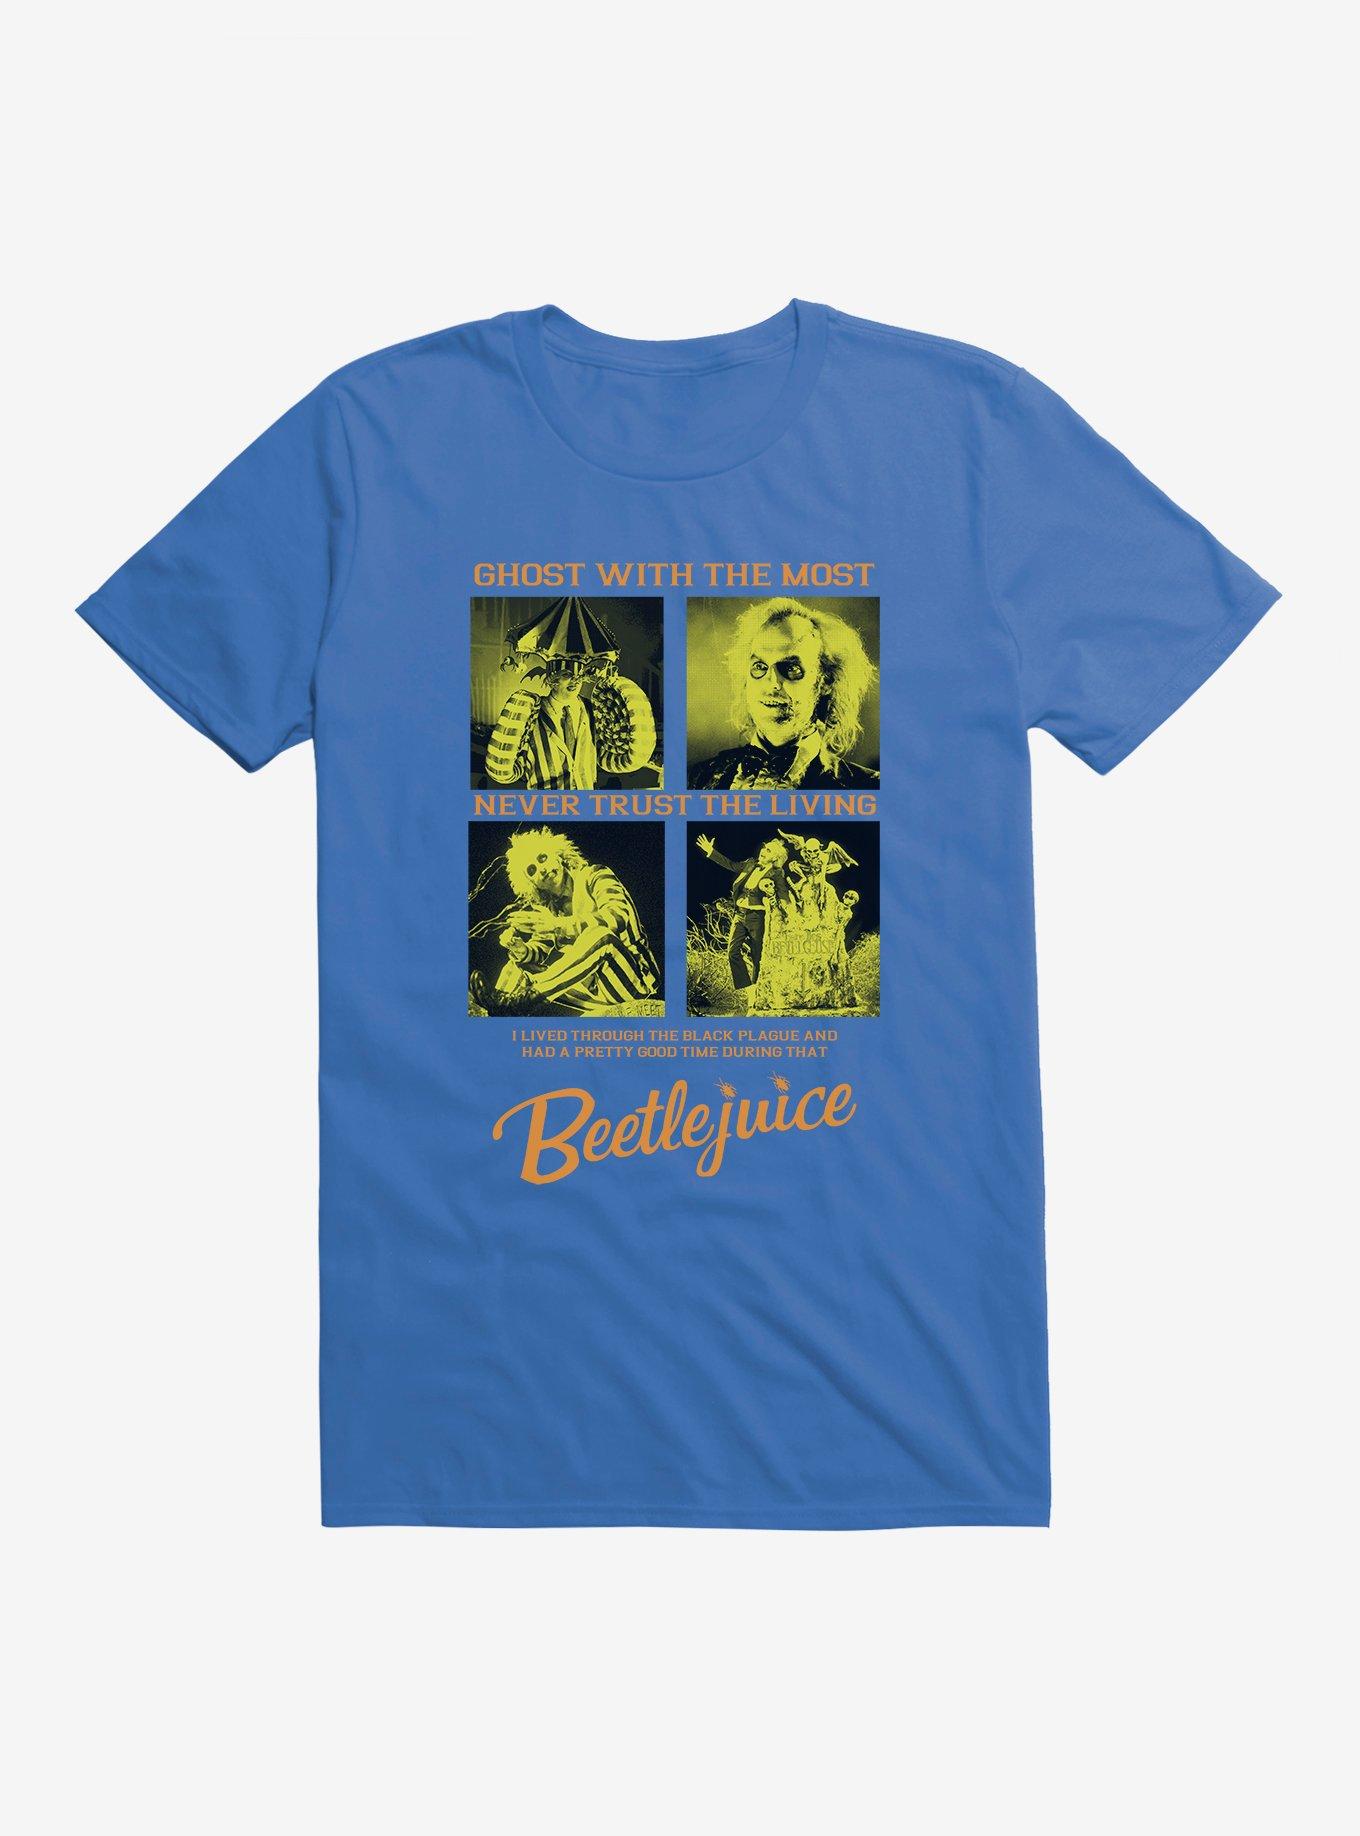 Beetlejuice Ghost With The Most T-Shirt, ROYAL BLUE, hi-res